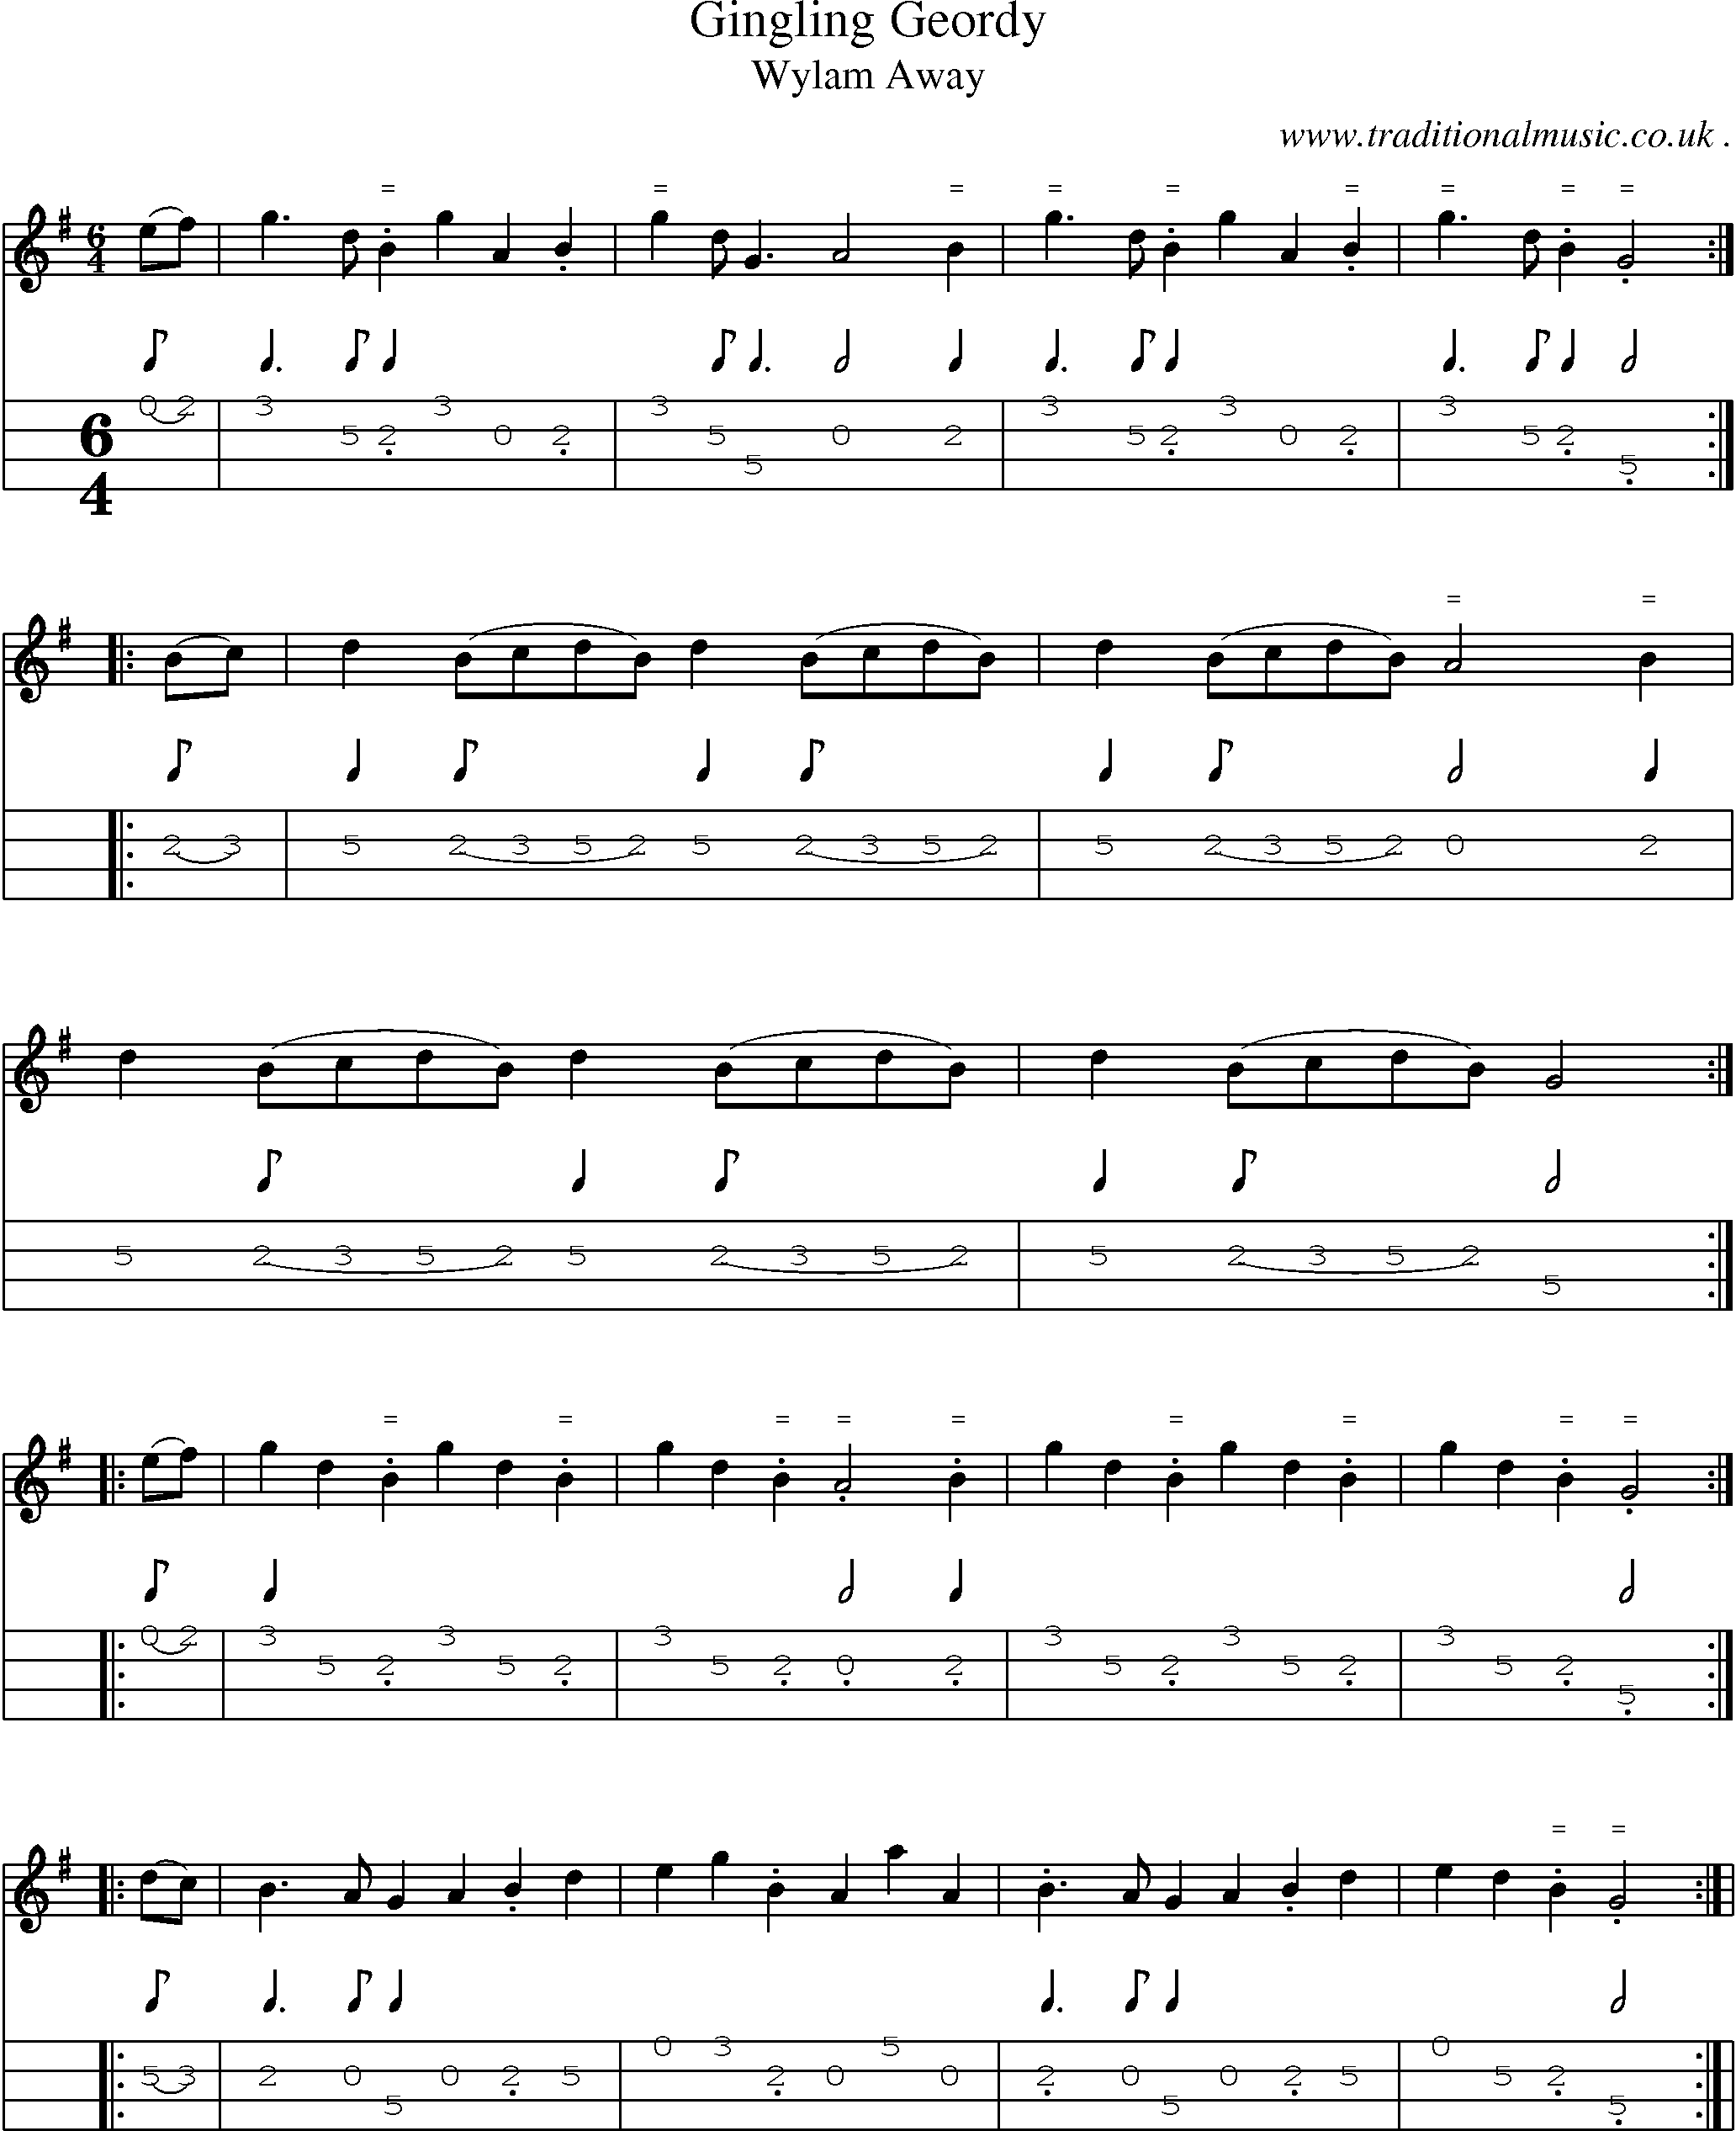 Sheet-Music and Mandolin Tabs for Gingling Geordy